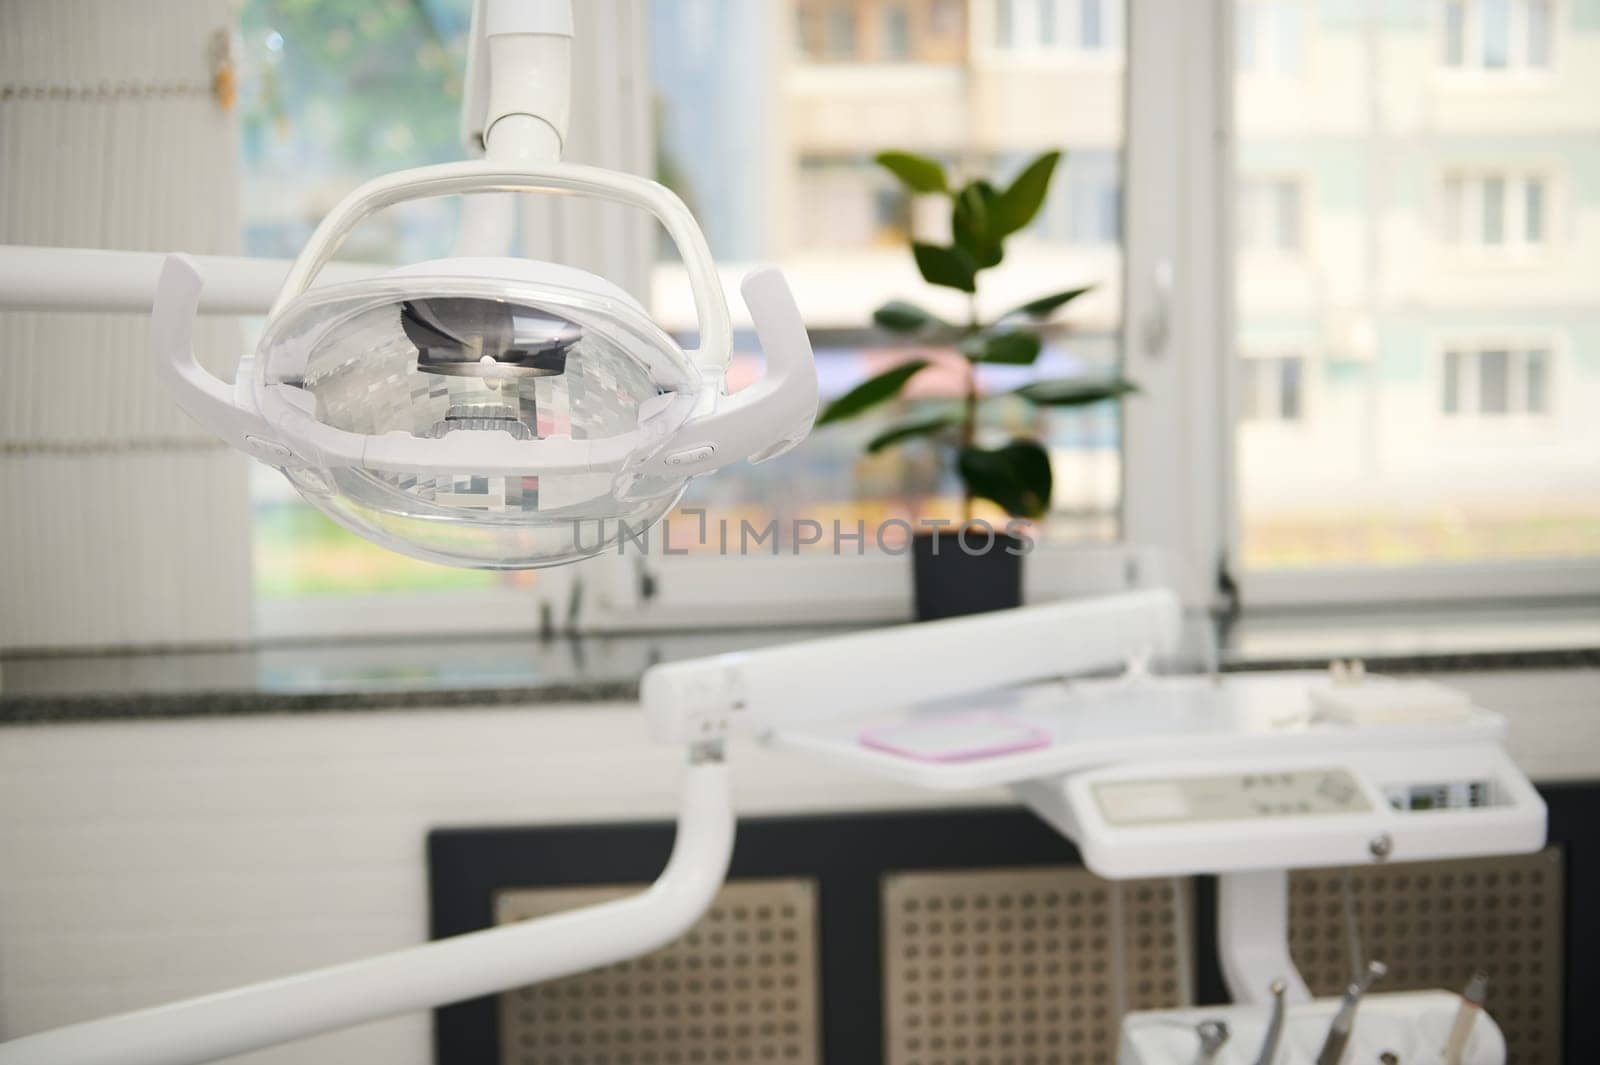 Dental office interior. Dental equipment. Operating surgical lamp with directional LED light in modern dentistry clinic. Dental practice. Dentistry. Healthcare and medicine